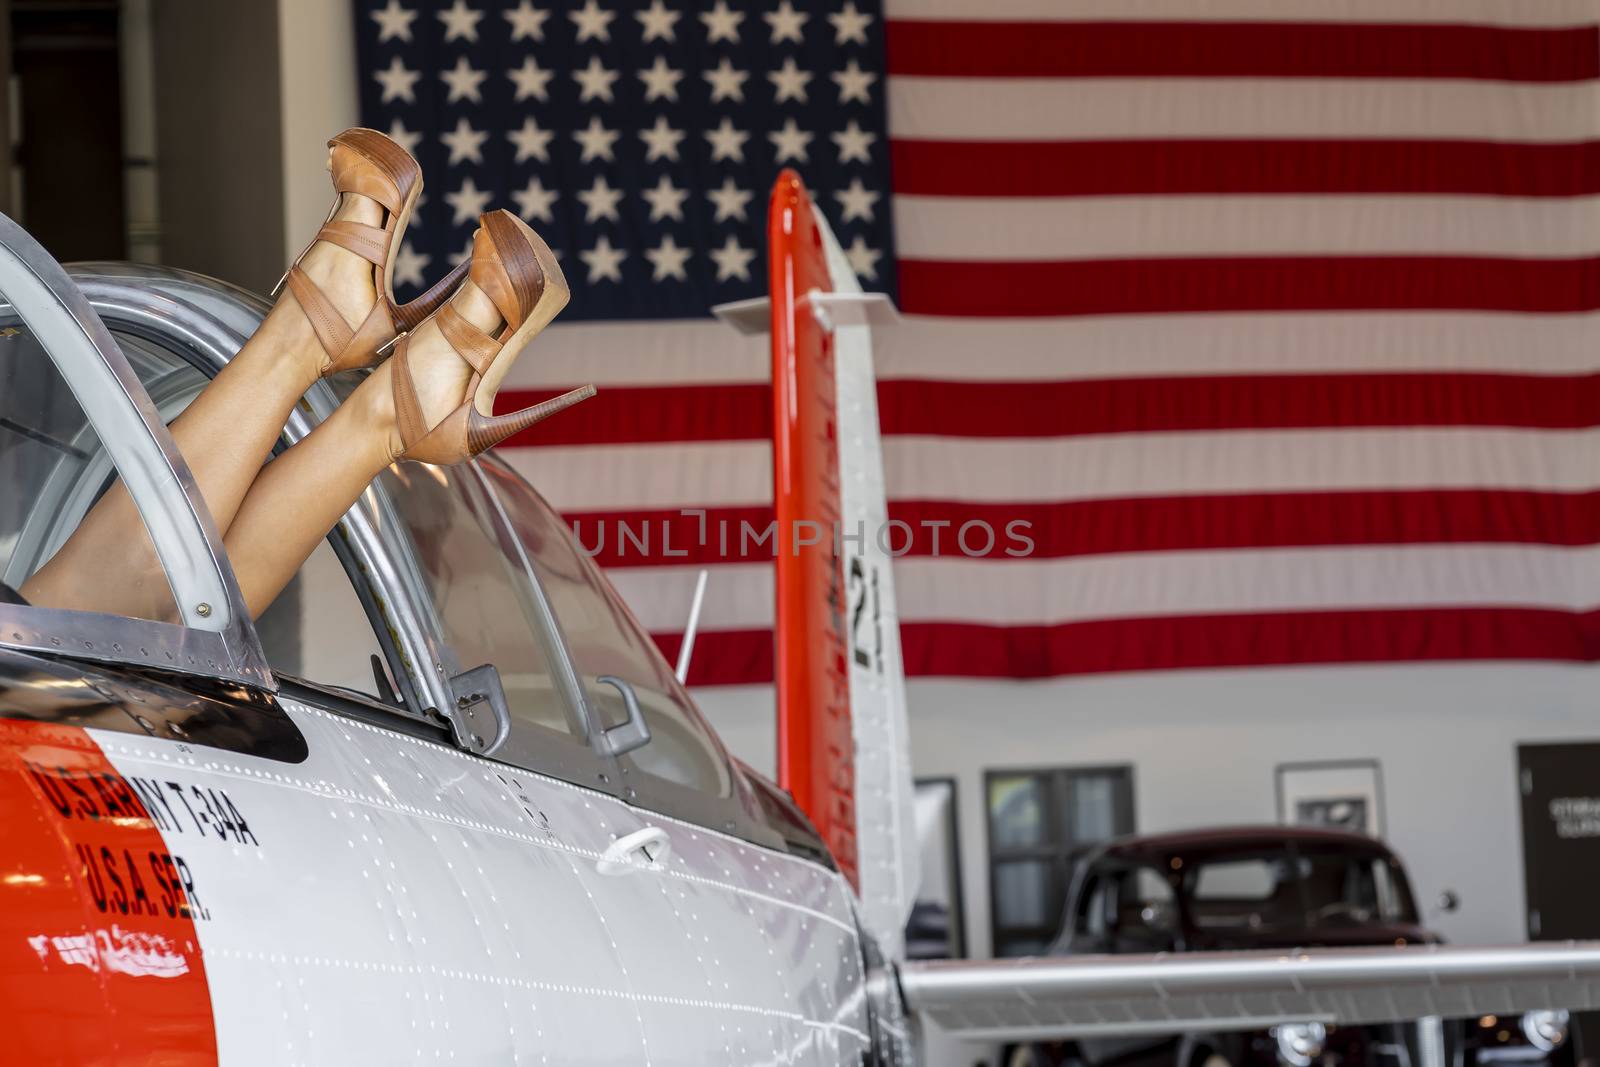 Lovely Blonde Model Posing With A Vintage World War II P-51 Mustang by actionsports